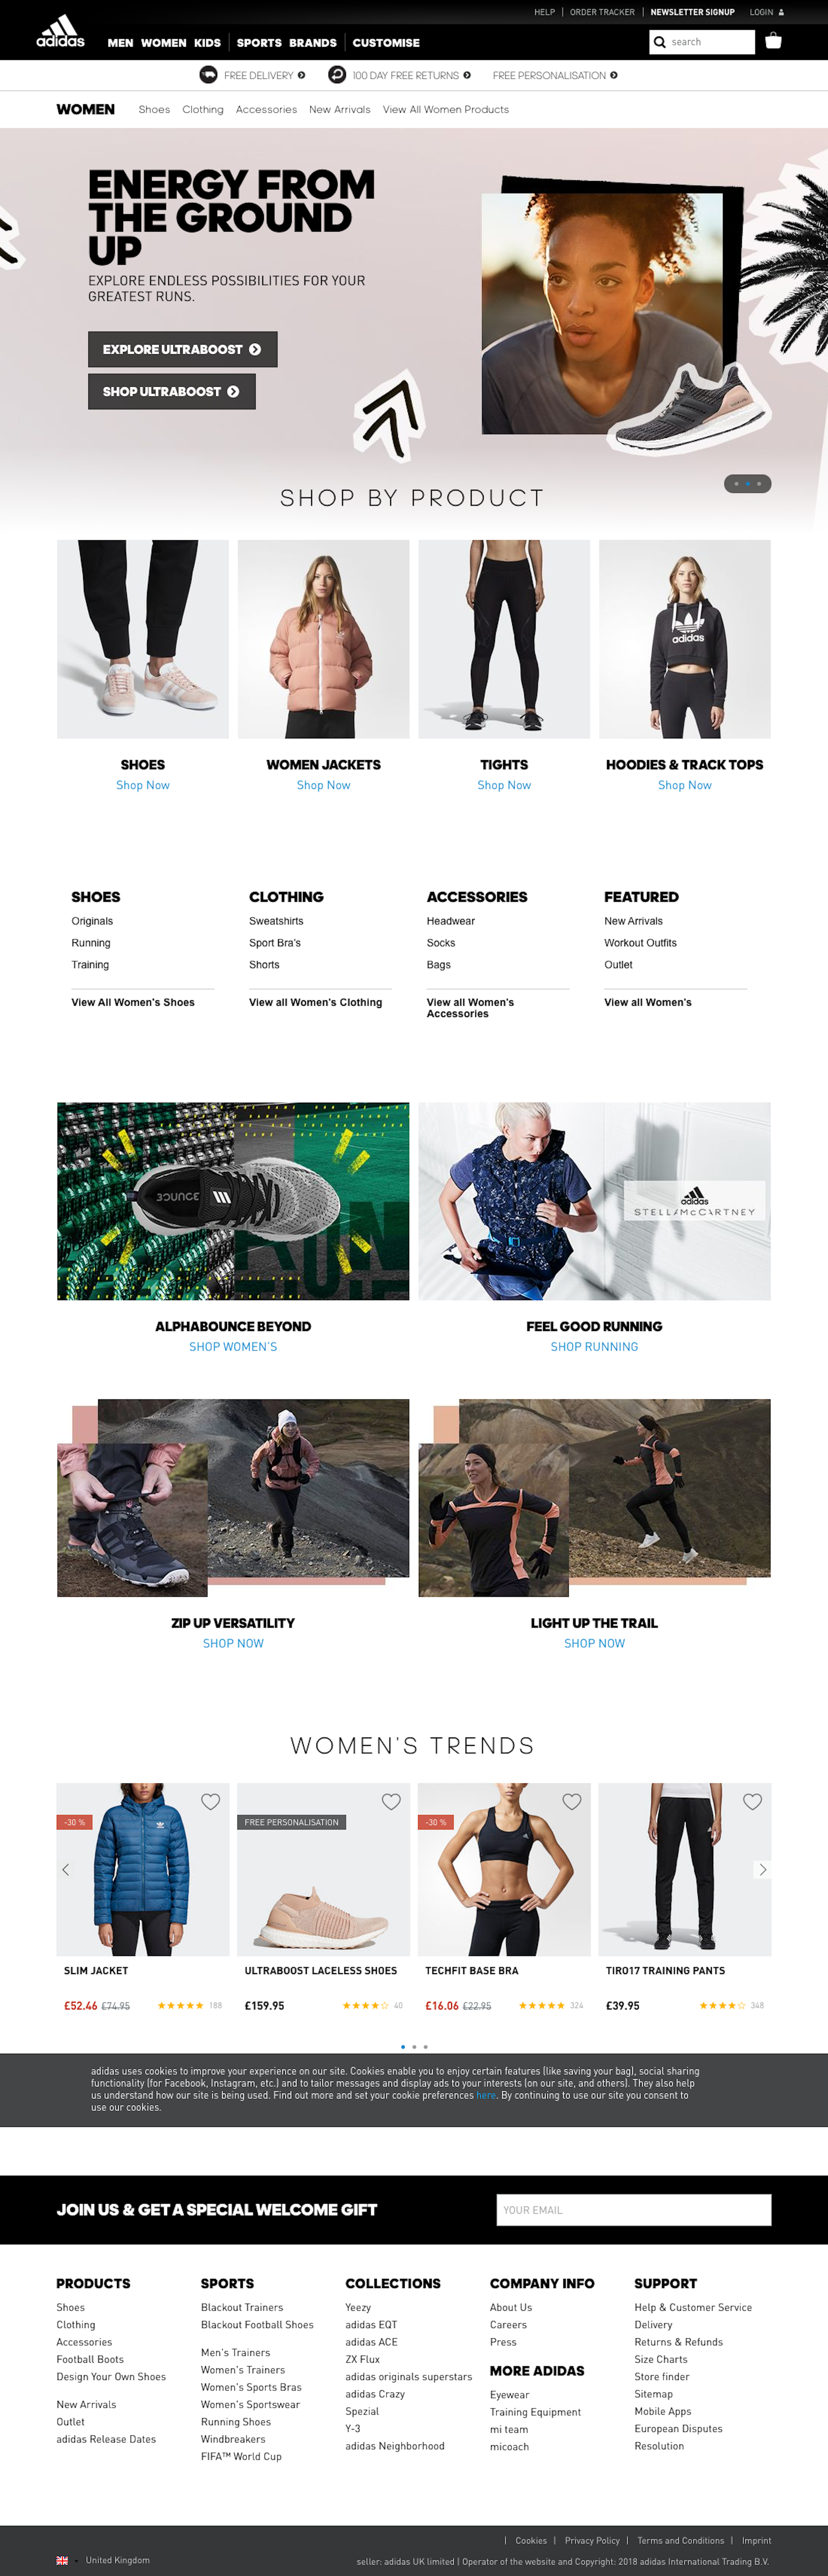 Adidas' Intermediary Category Page – 485 of Intermediary Category Page Examples – Baymard Institute